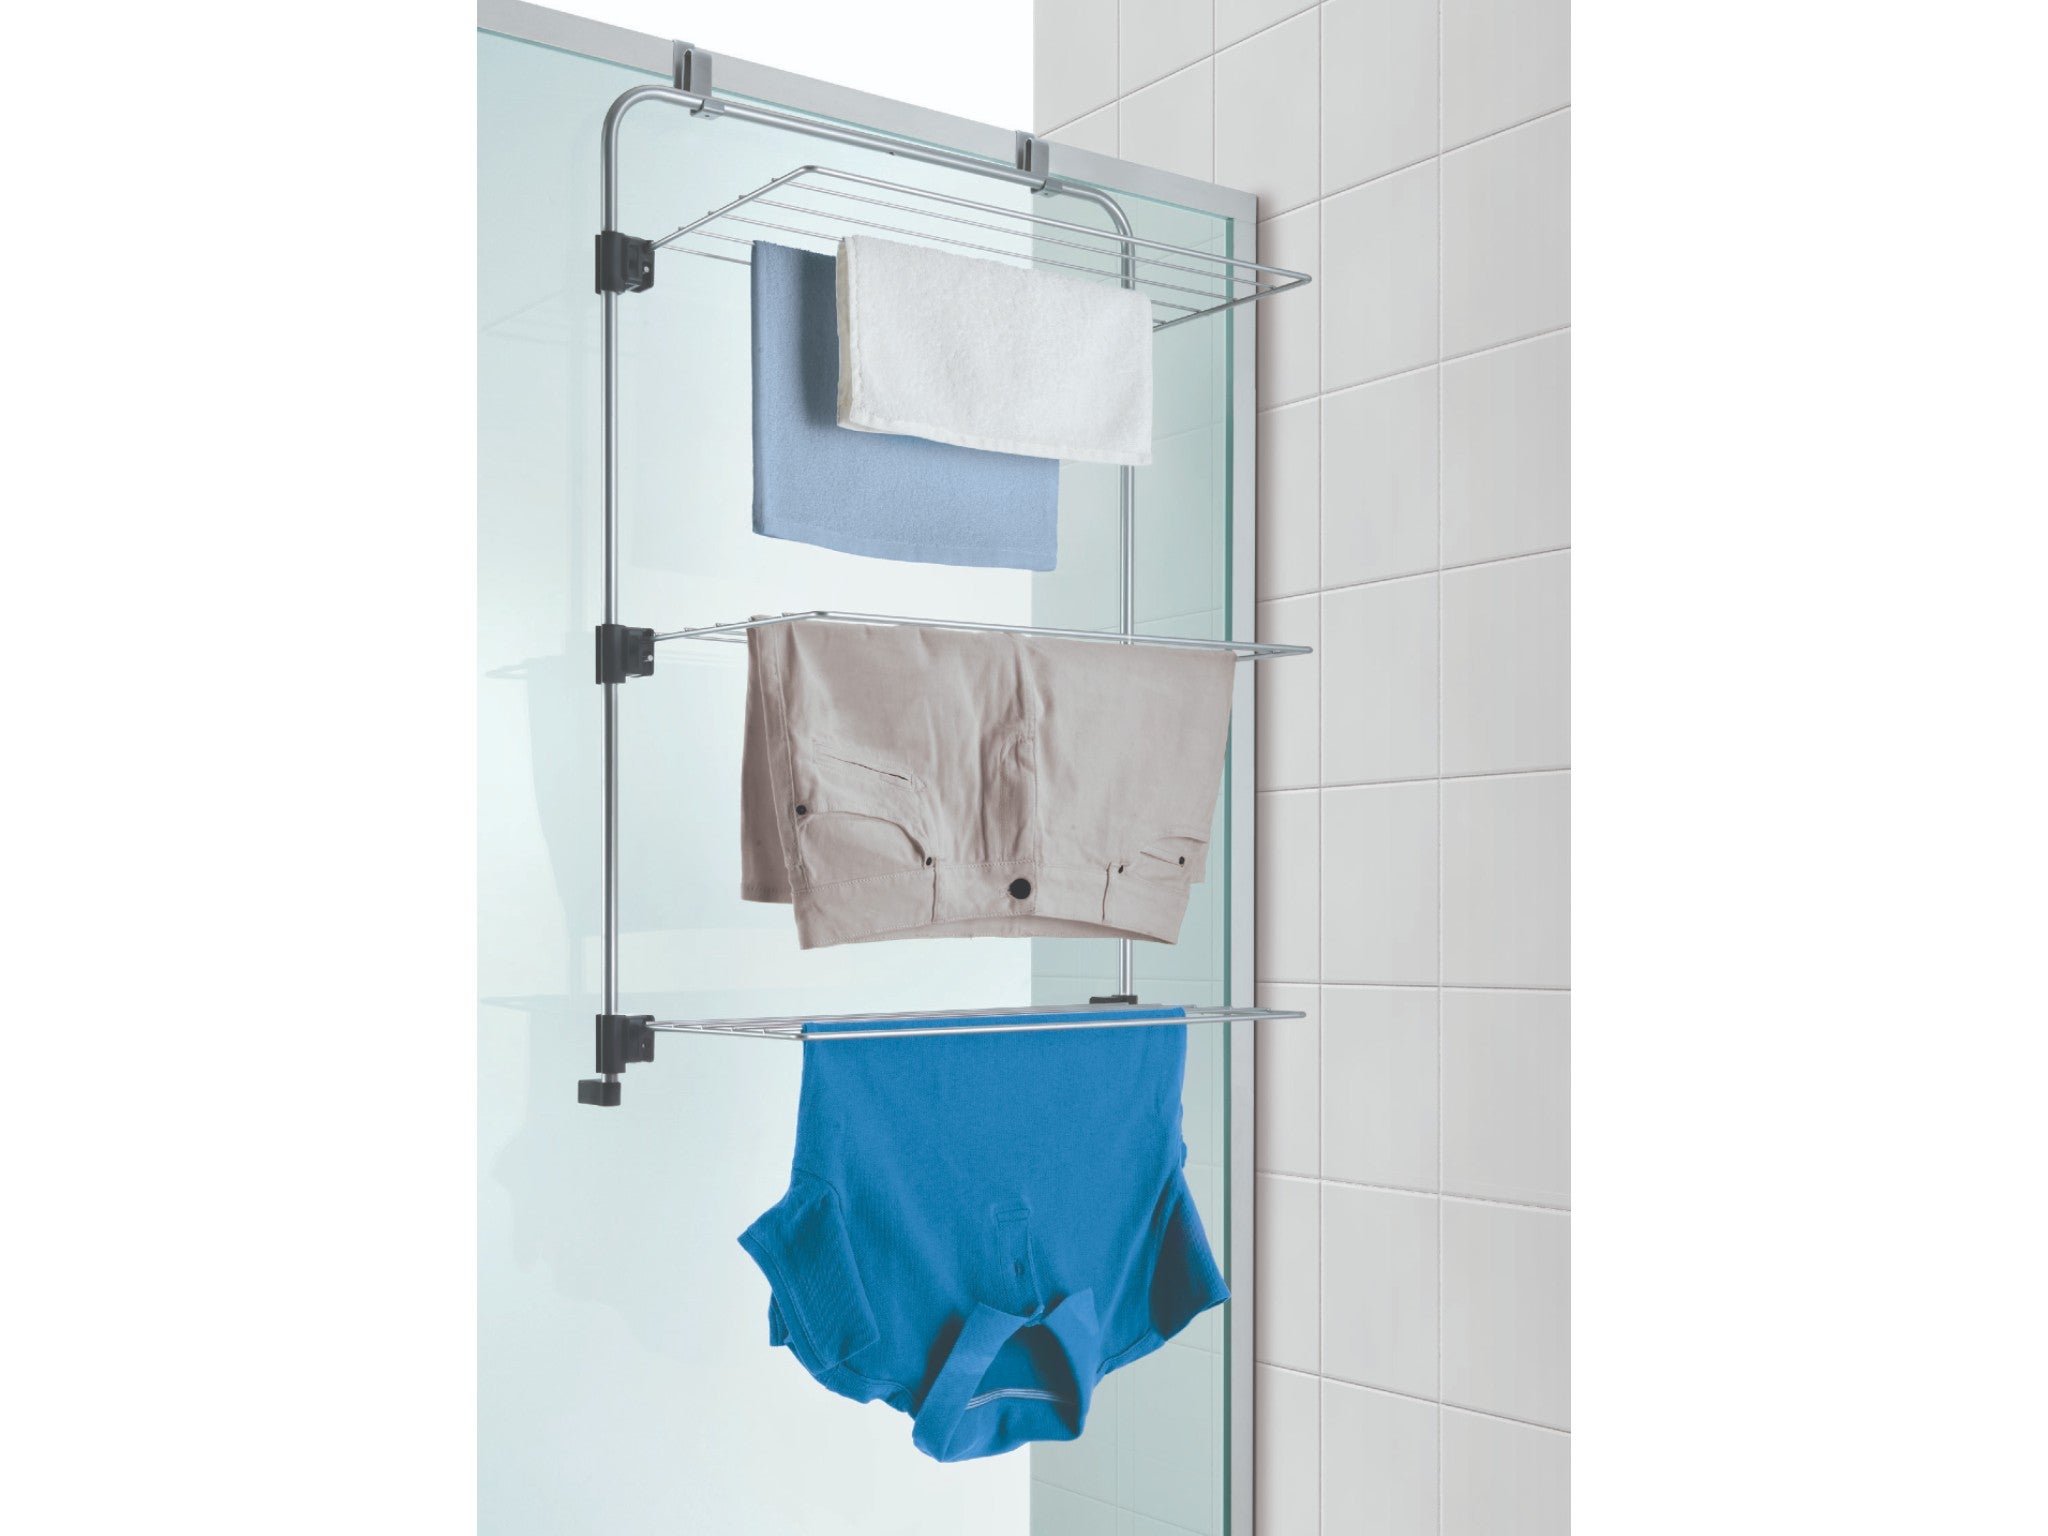 Best clothes airers and drying racks 2021: From heated to wall